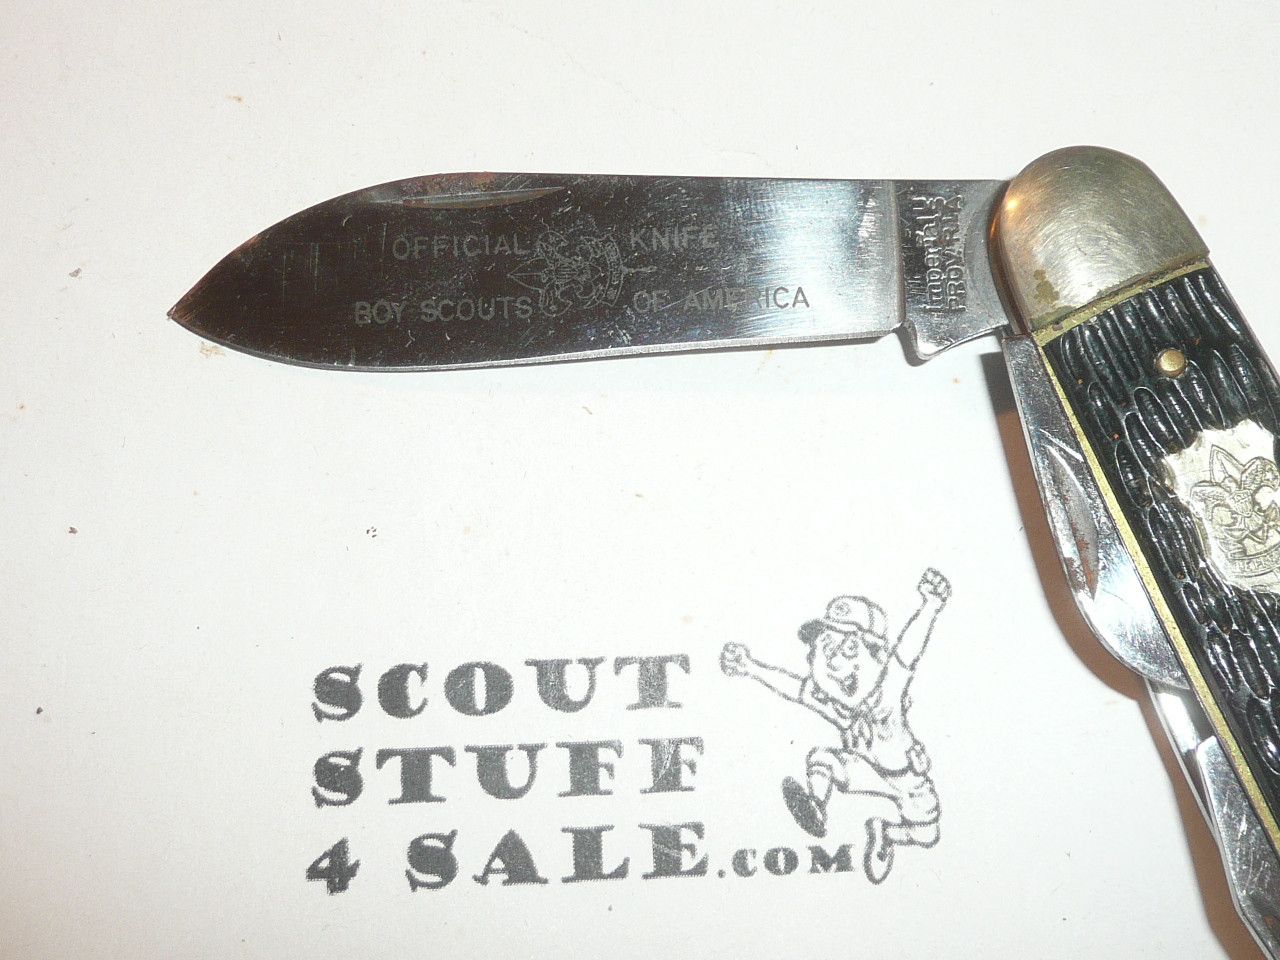 Official Boy Scout Pocket Knife made by Imperial, very lite use with box